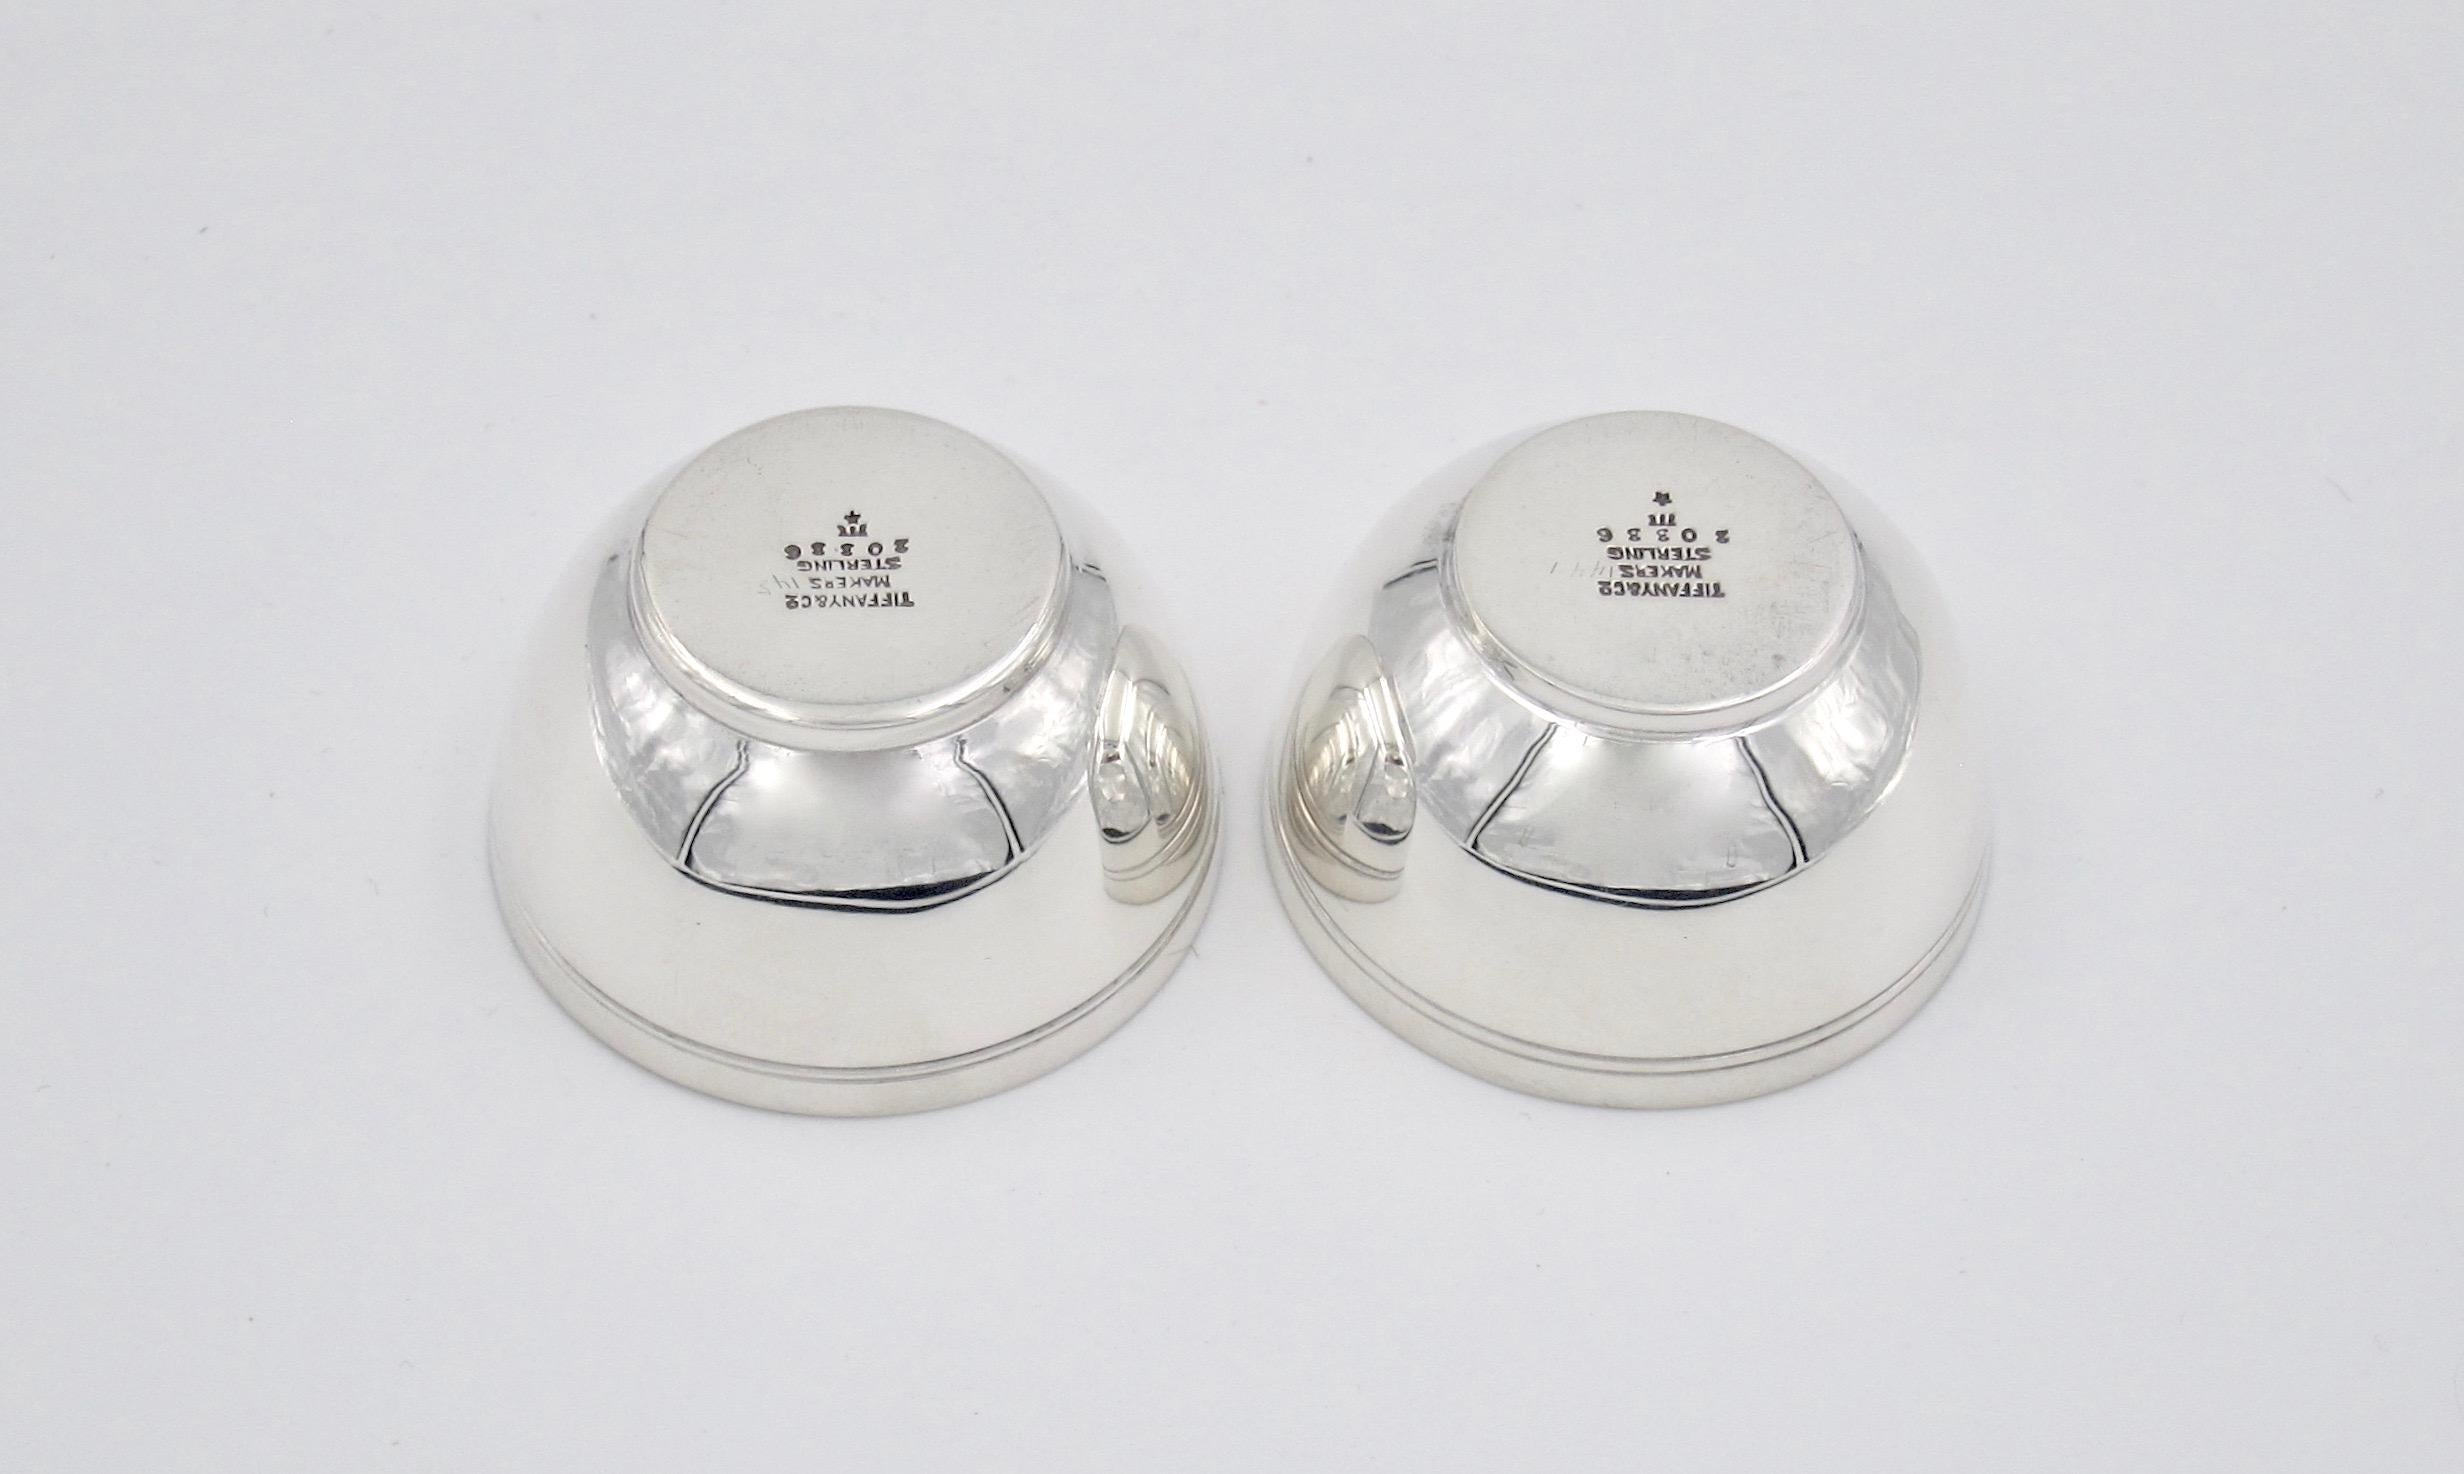 American Tiffany & Co. Sterling Silver Miniature Bowls or Salt Cellar Pair from 1924